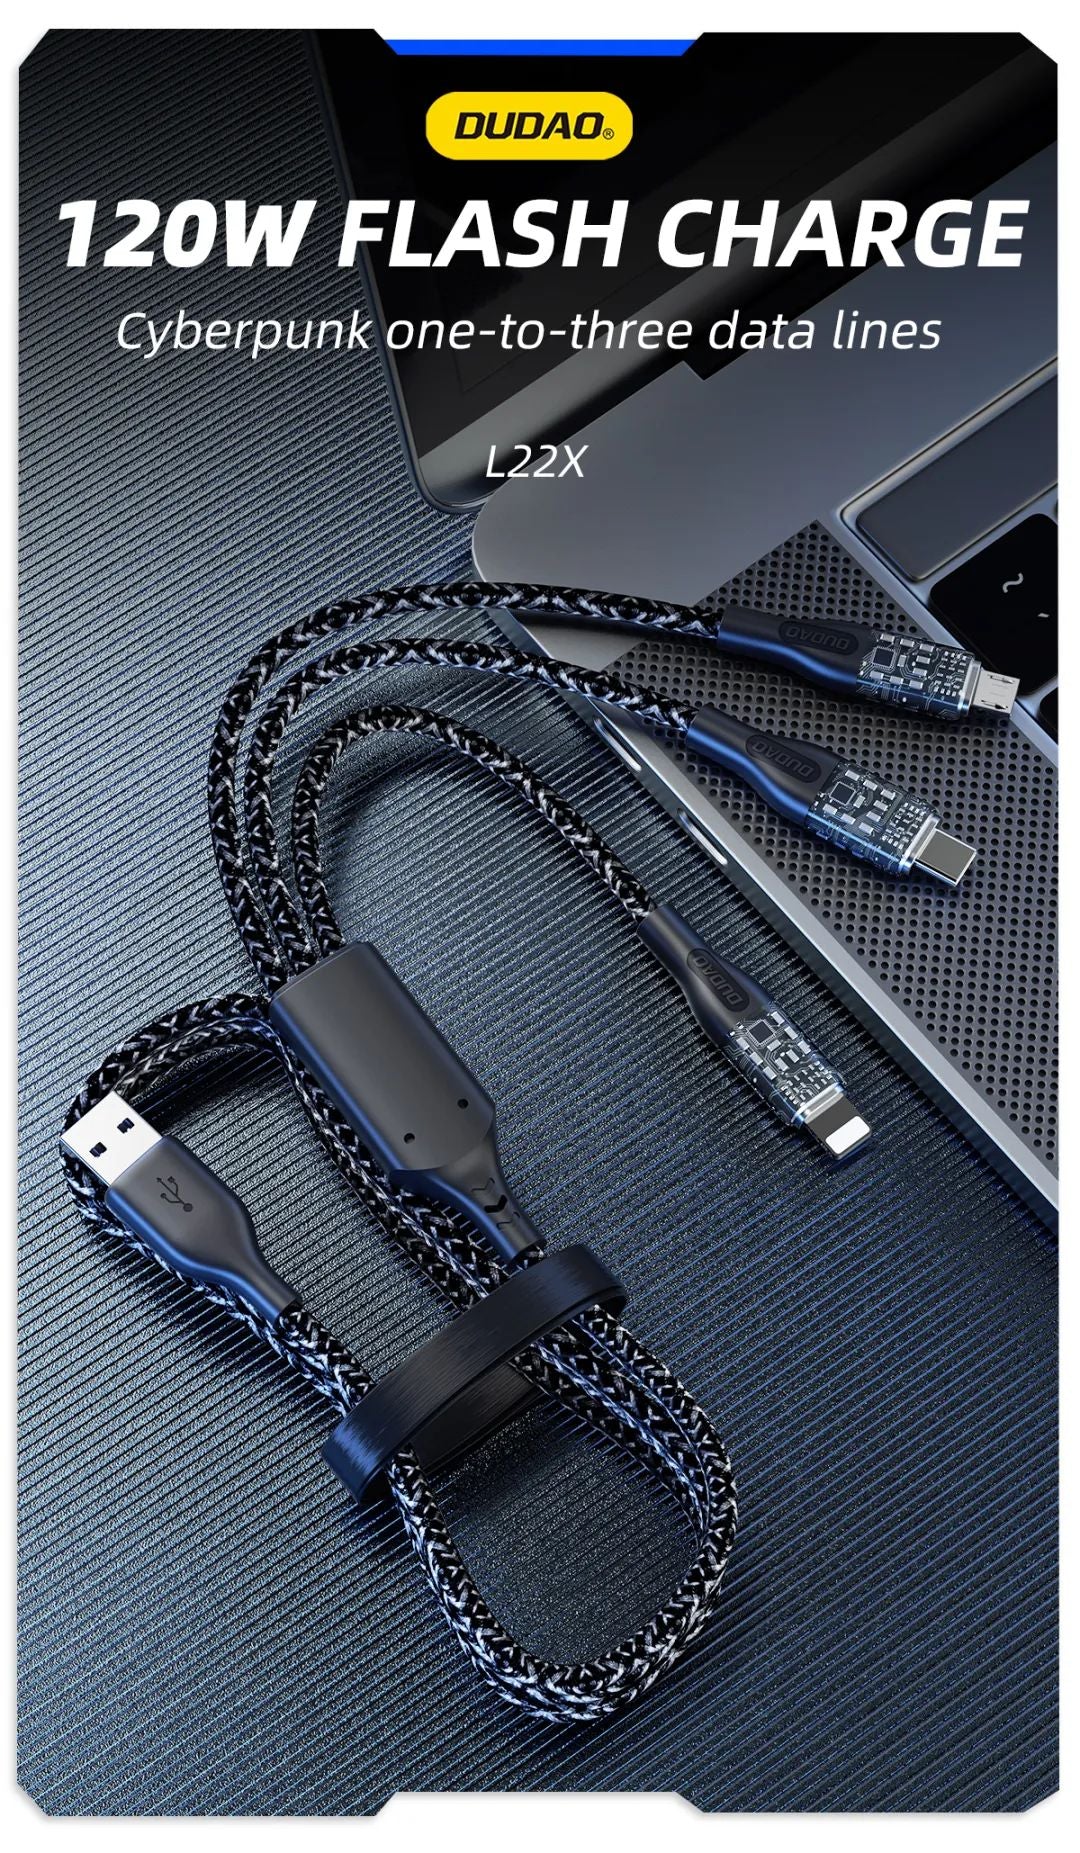 Dudao L22X 120W Flash Charge 3 in 1 Multi-function Charging Cable(Lightning/Micro USB/Type-C) 1.2 Meter